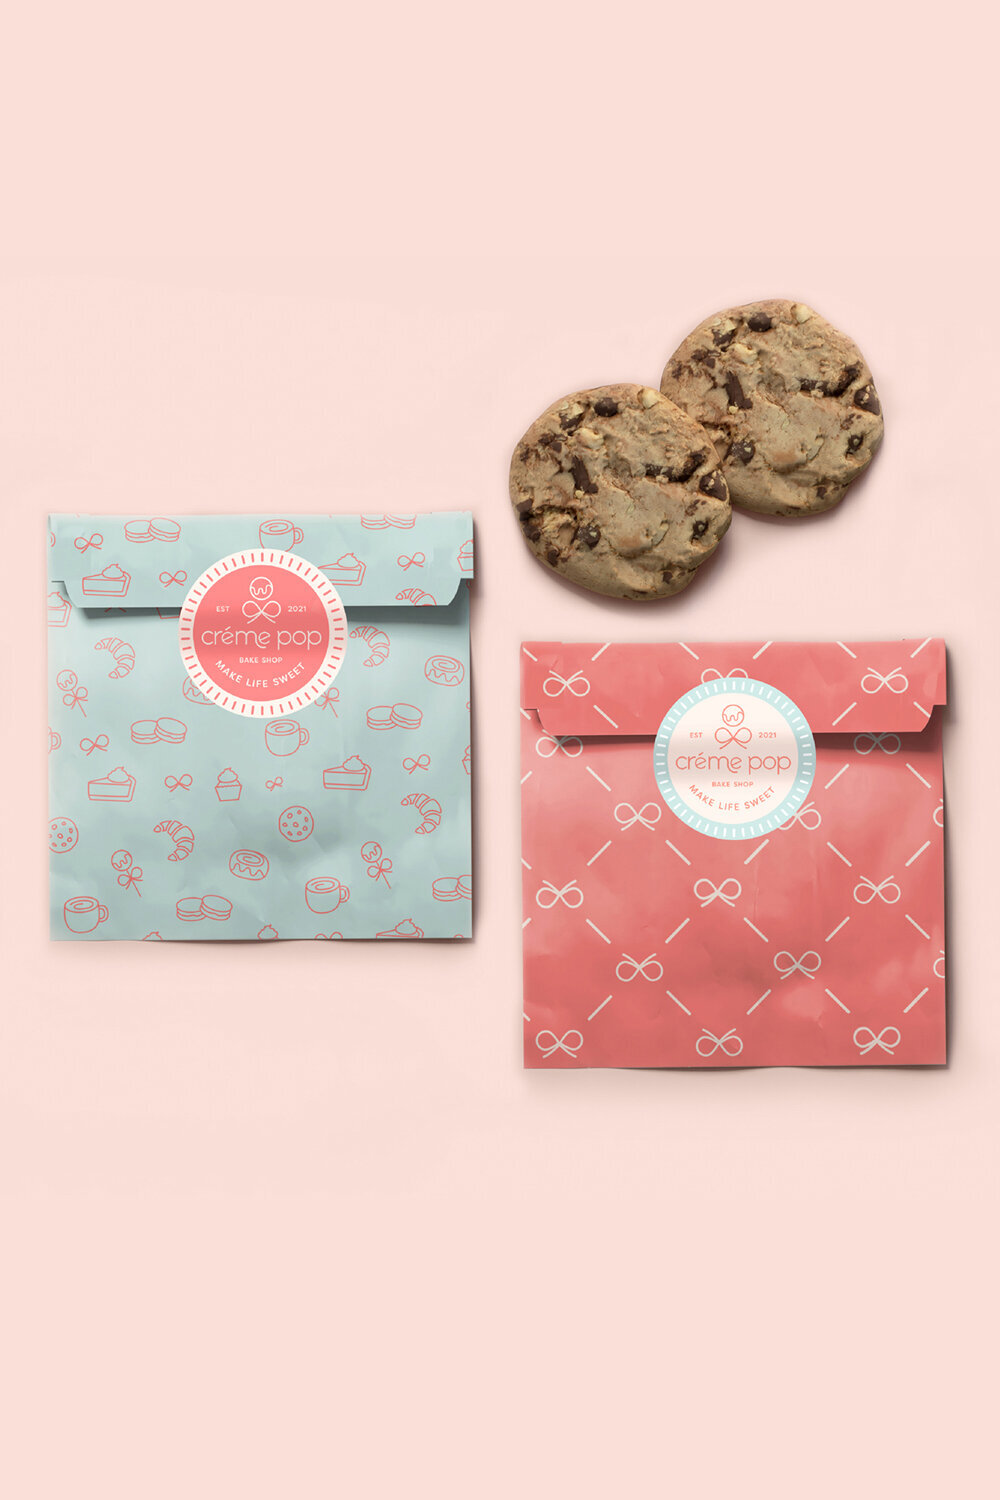 cookie package for bake shop with badge logo